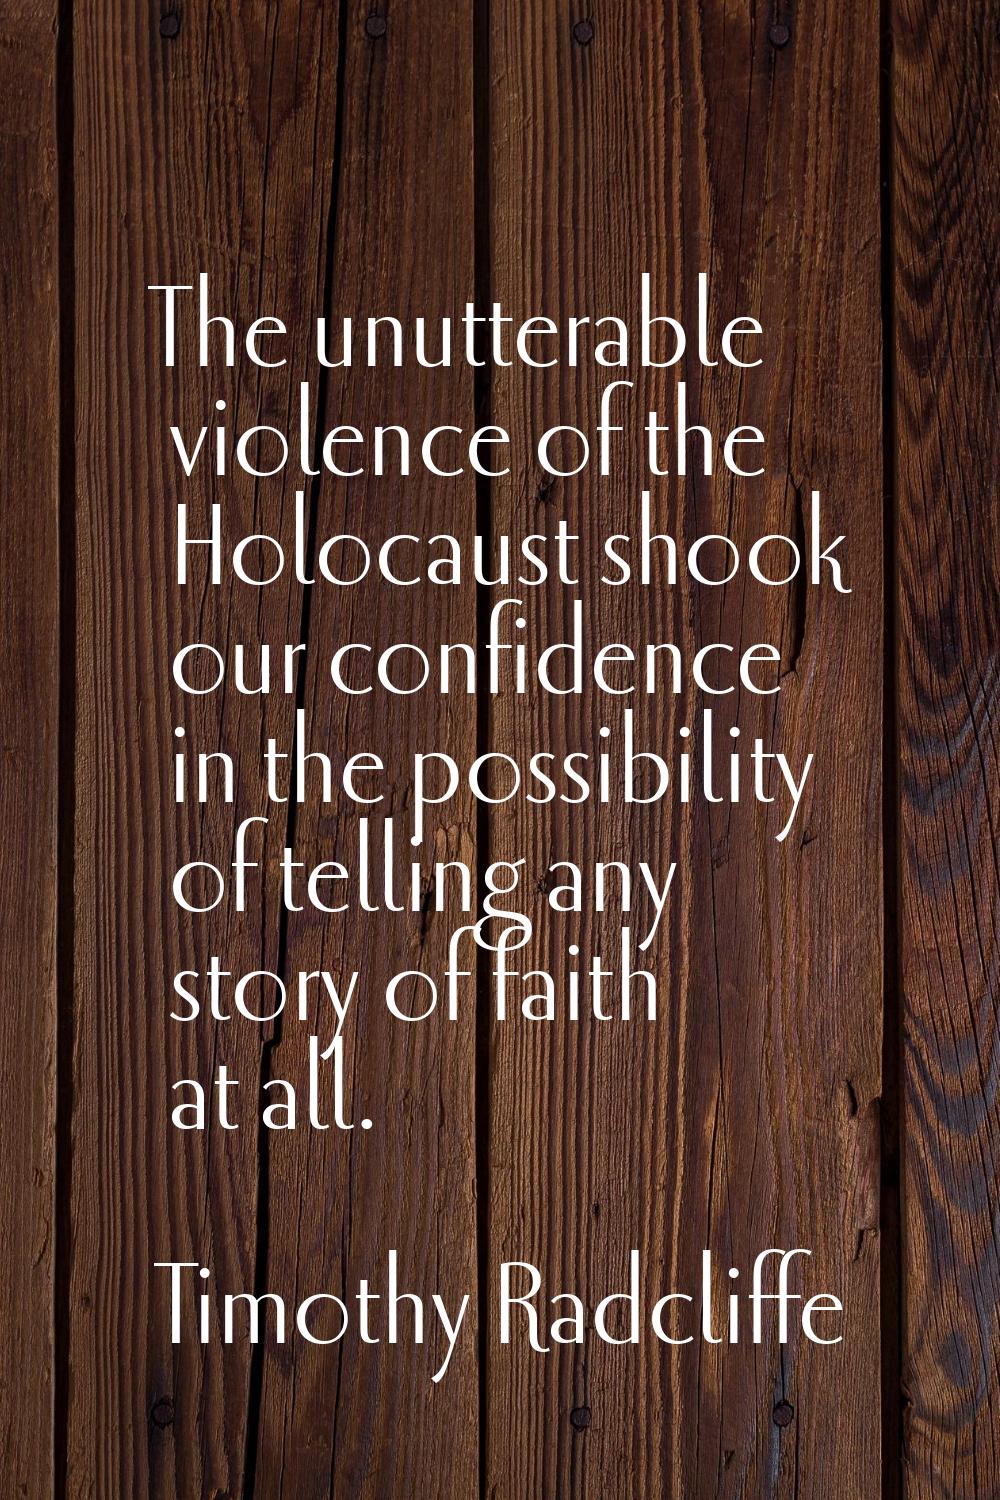 The unutterable violence of the Holocaust shook our confidence in the possibility of telling any st